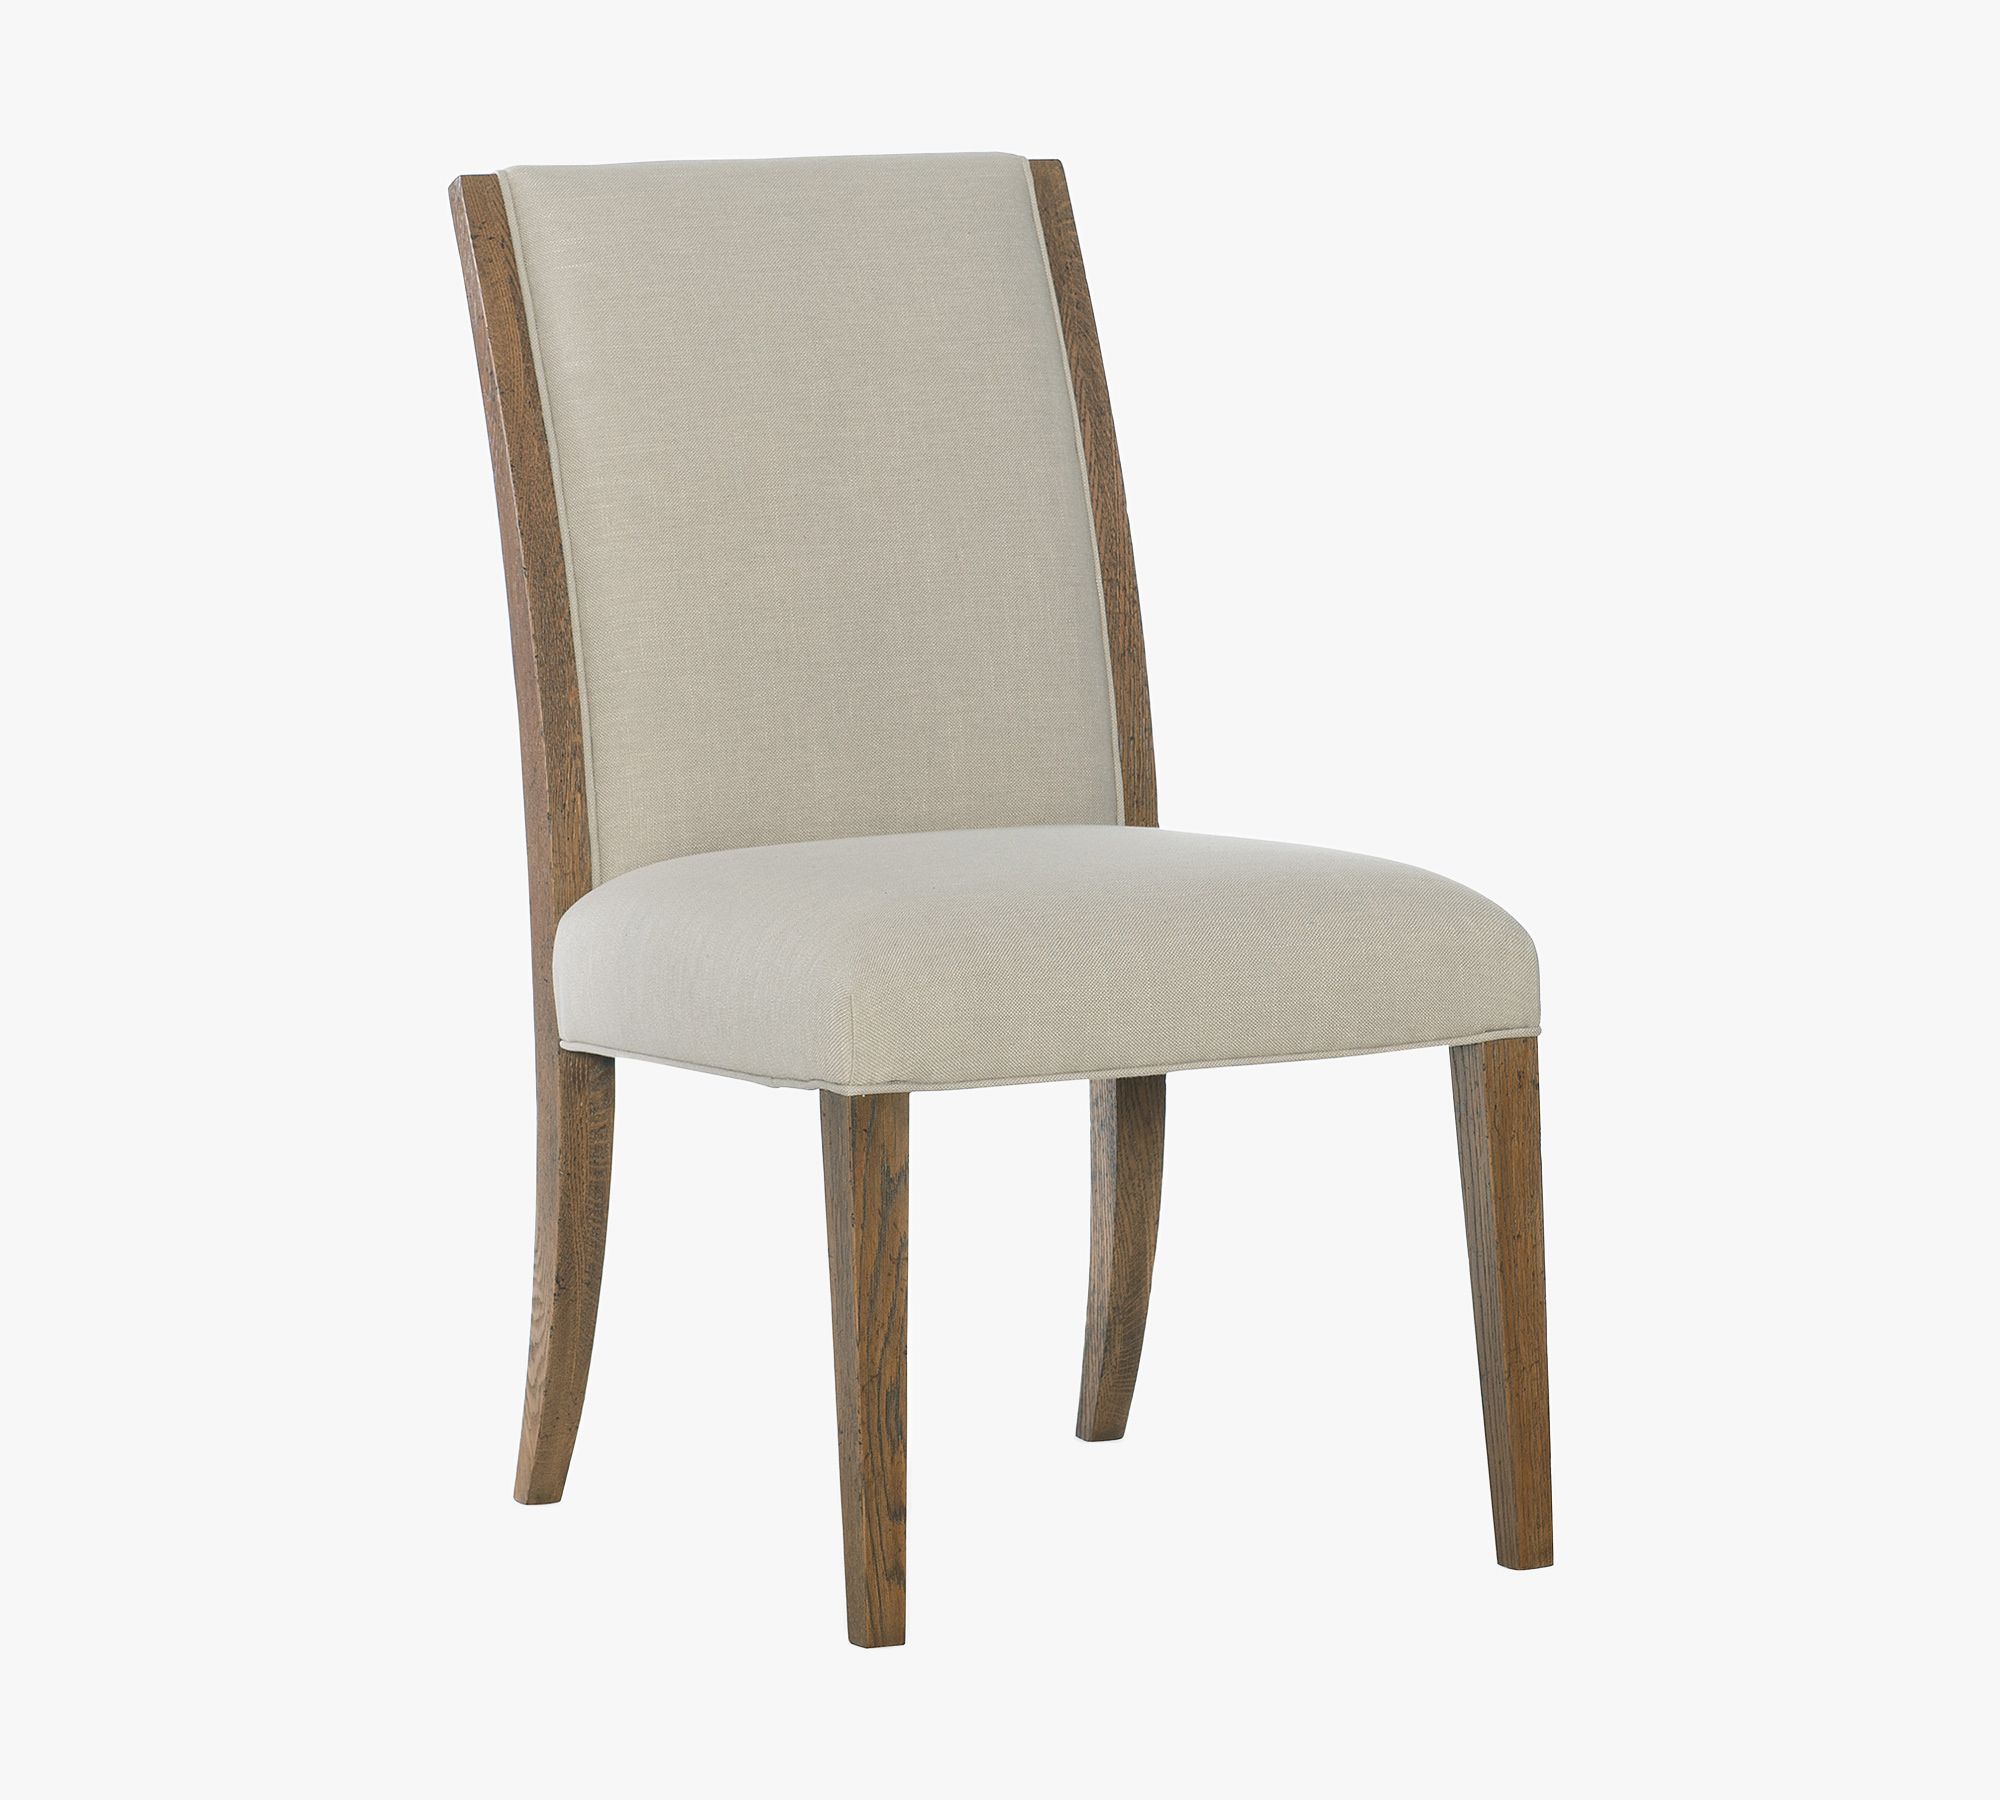 Shalina Upholstered Dining Chairs - Set of 2